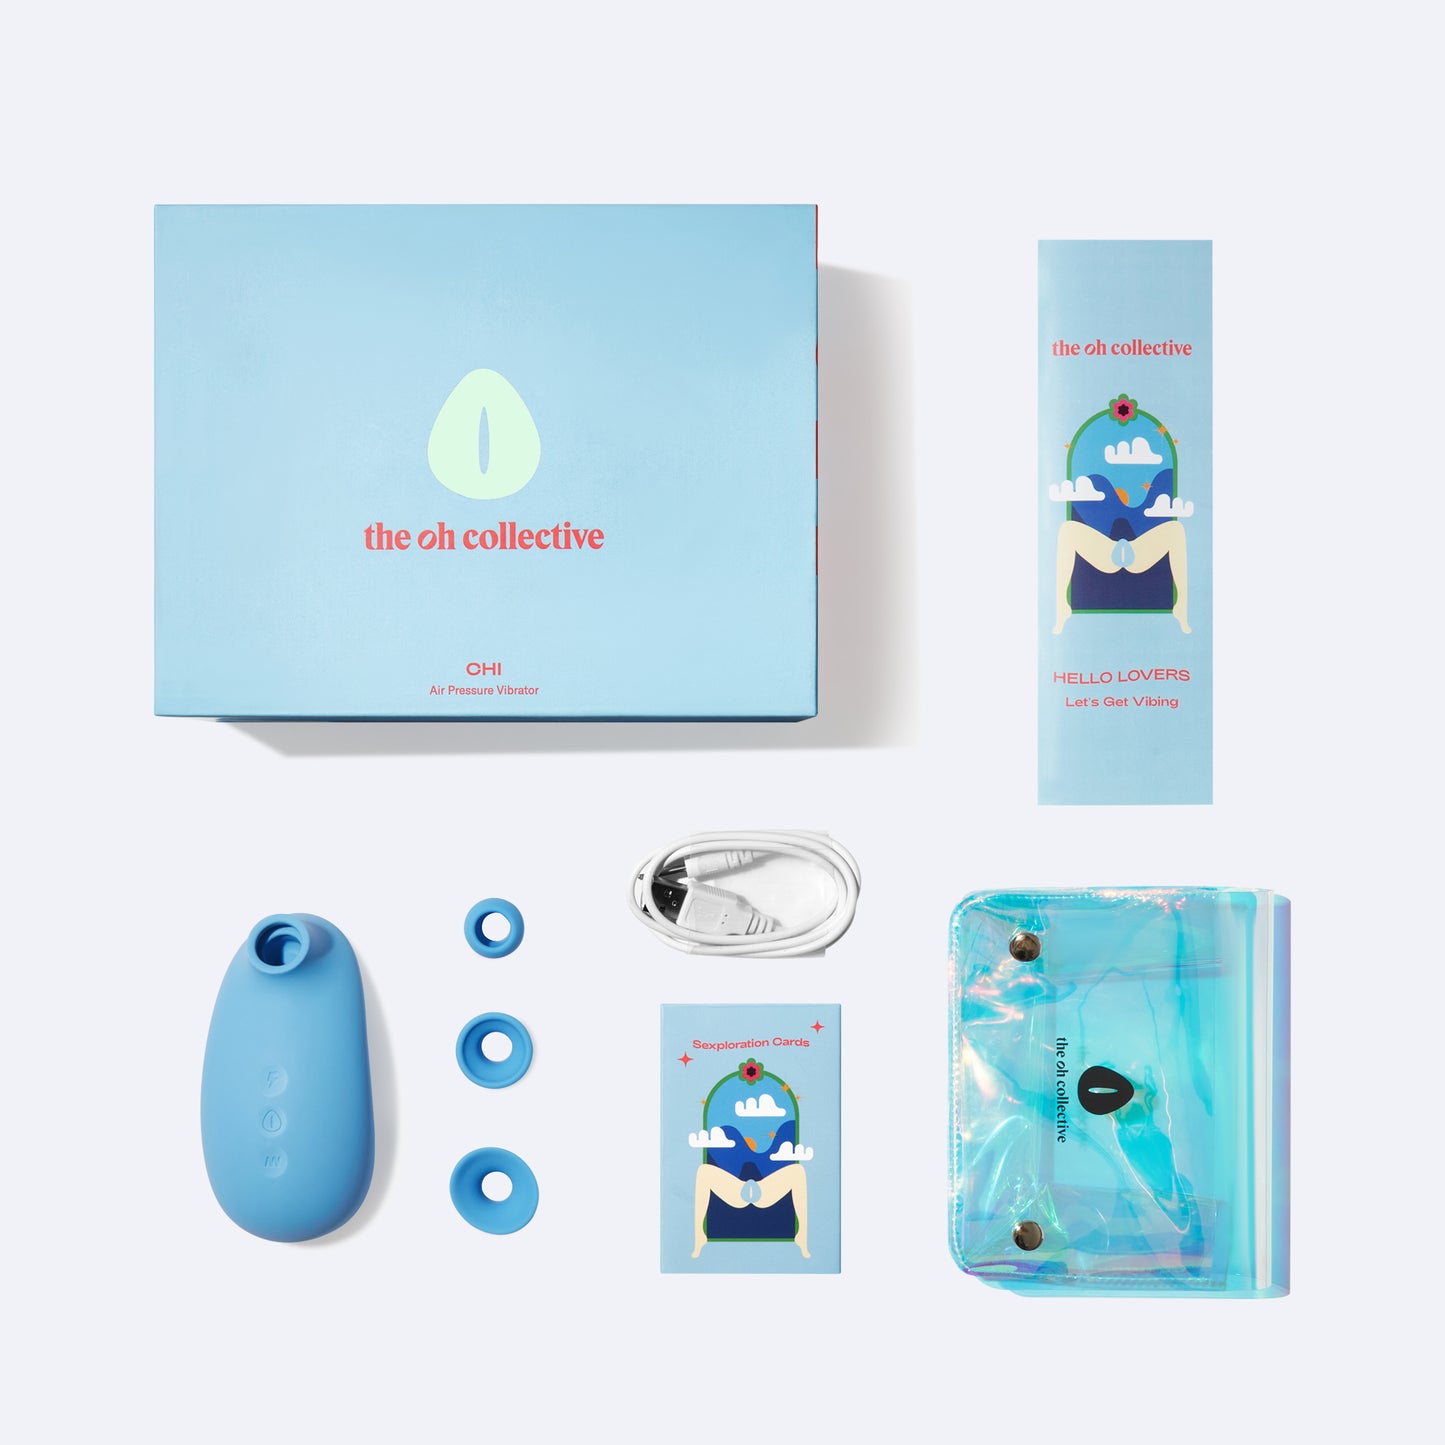 ~*~Colour~*~Romantic Blue---~*~Kleur~*~Hemels Blauw---~*~Caption~*~Our CHI Air Suction Vibrator comes with 3 interchangeable suction heads, a deck of Sexploration Cards, one USB charger, a iridescent storage pouch, and an international manual.---